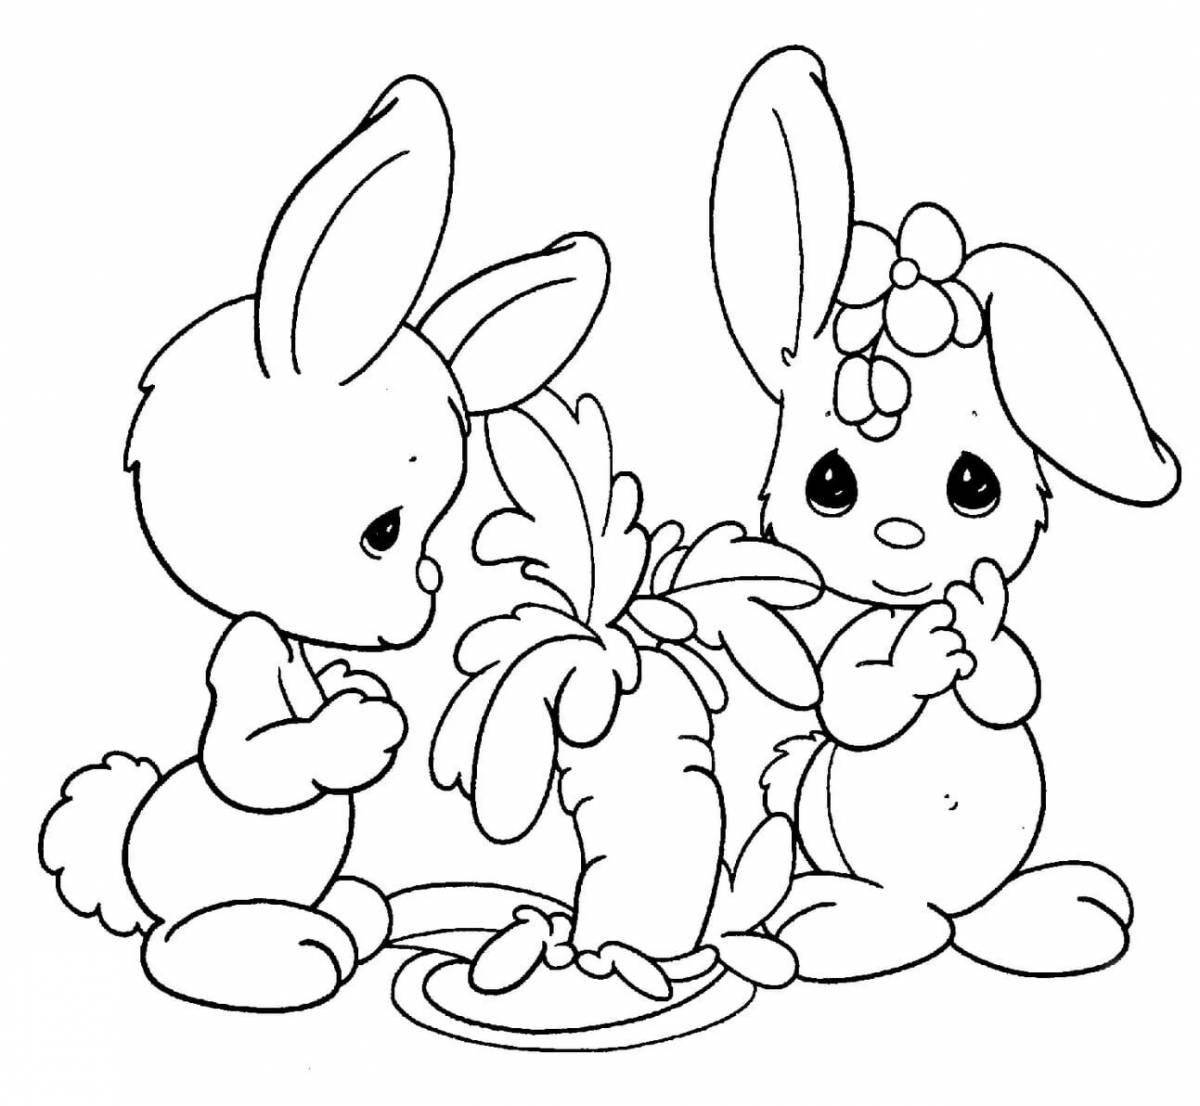 Fancy rabbit coloring book for kids